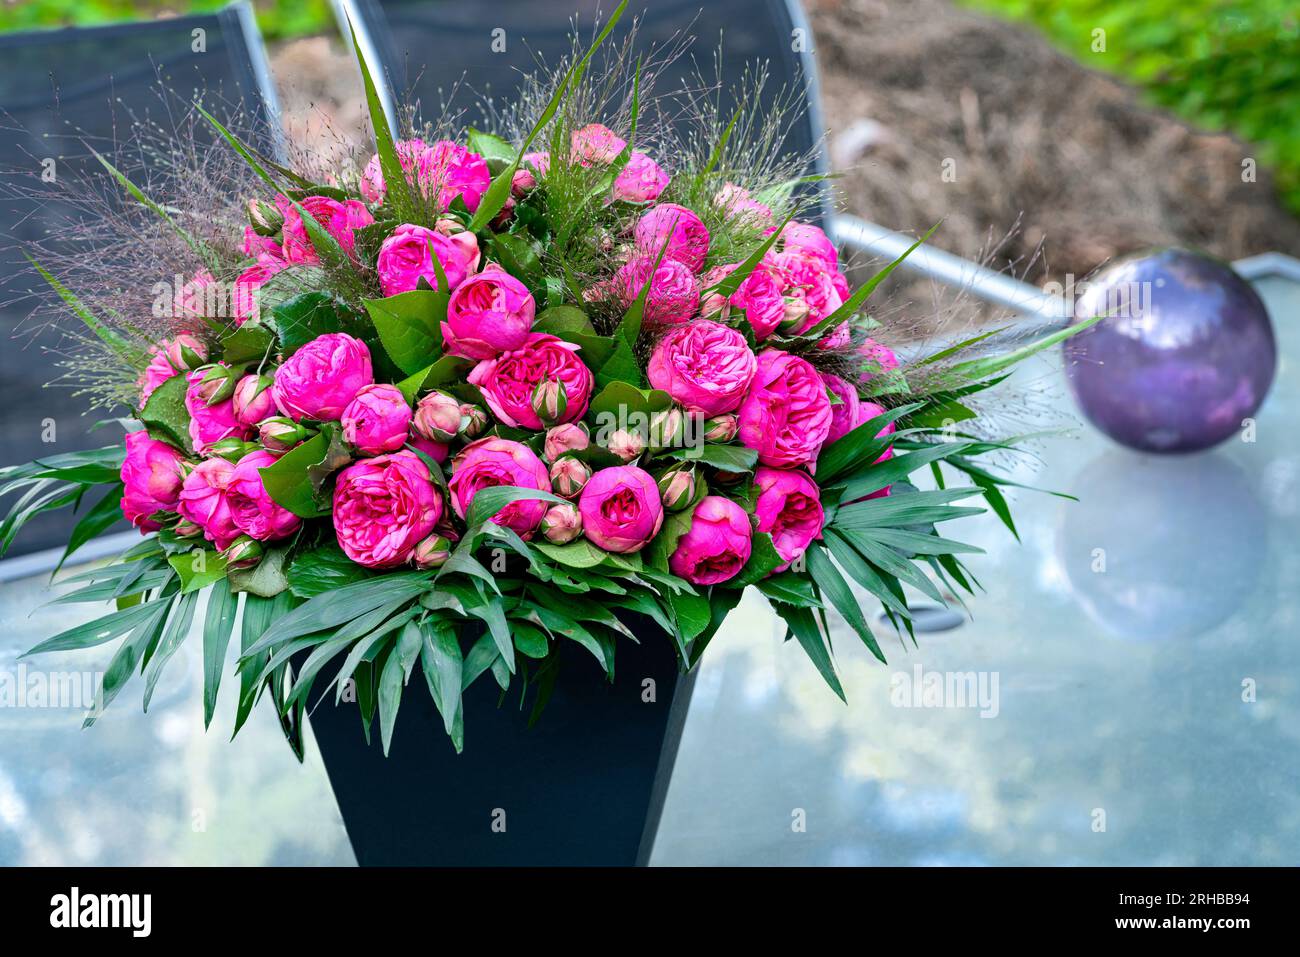 A hugh vibrant pink bouquet of Pomponella roses Stock Photo